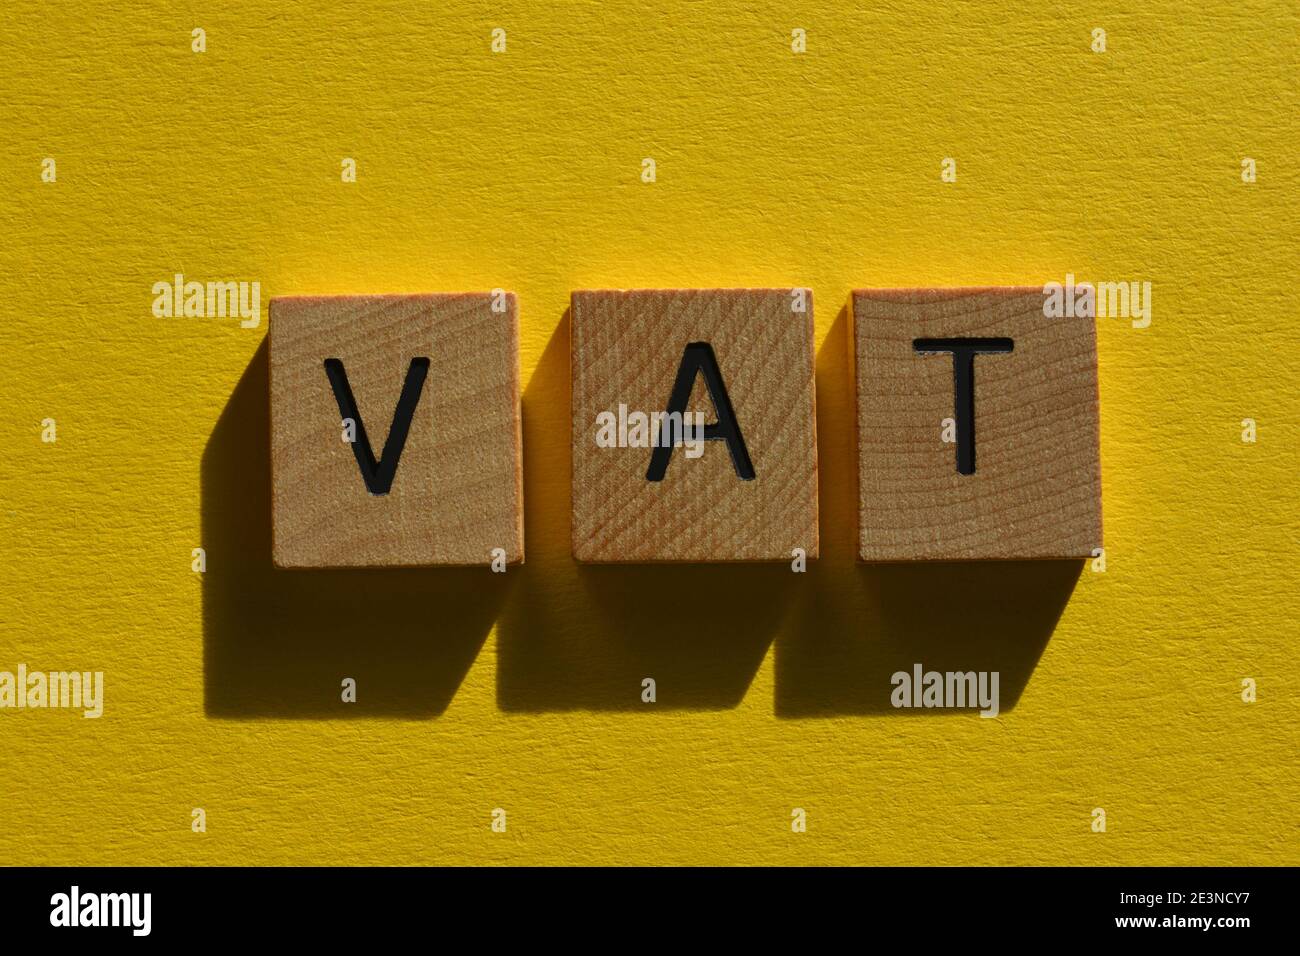 VAT acronym for Value Added Tax Stock Photo - Alamy